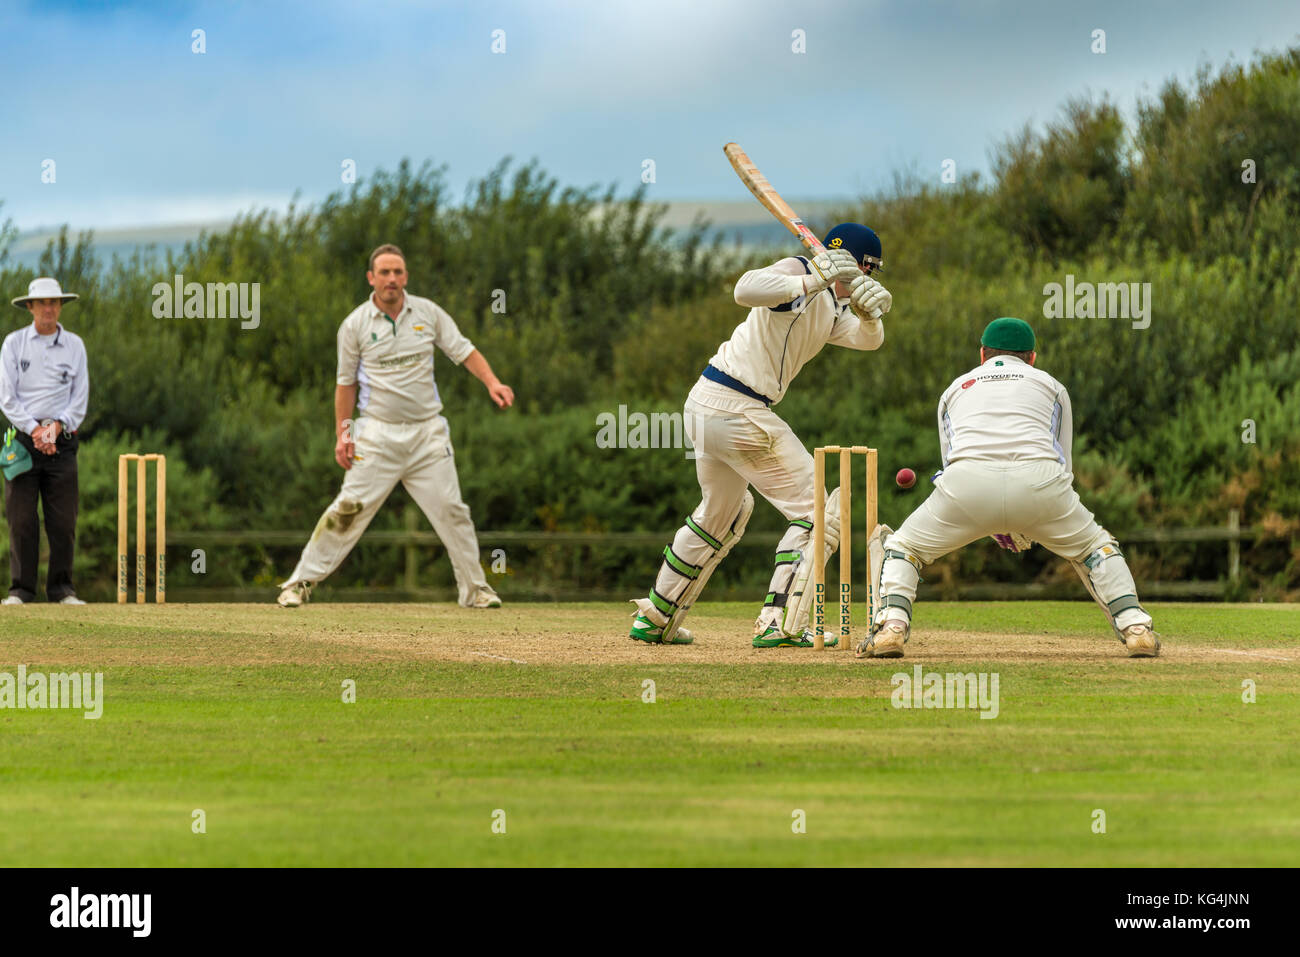 A batsman plays a shot during a Sunday League match between two local Cricket teams. Stock Photo